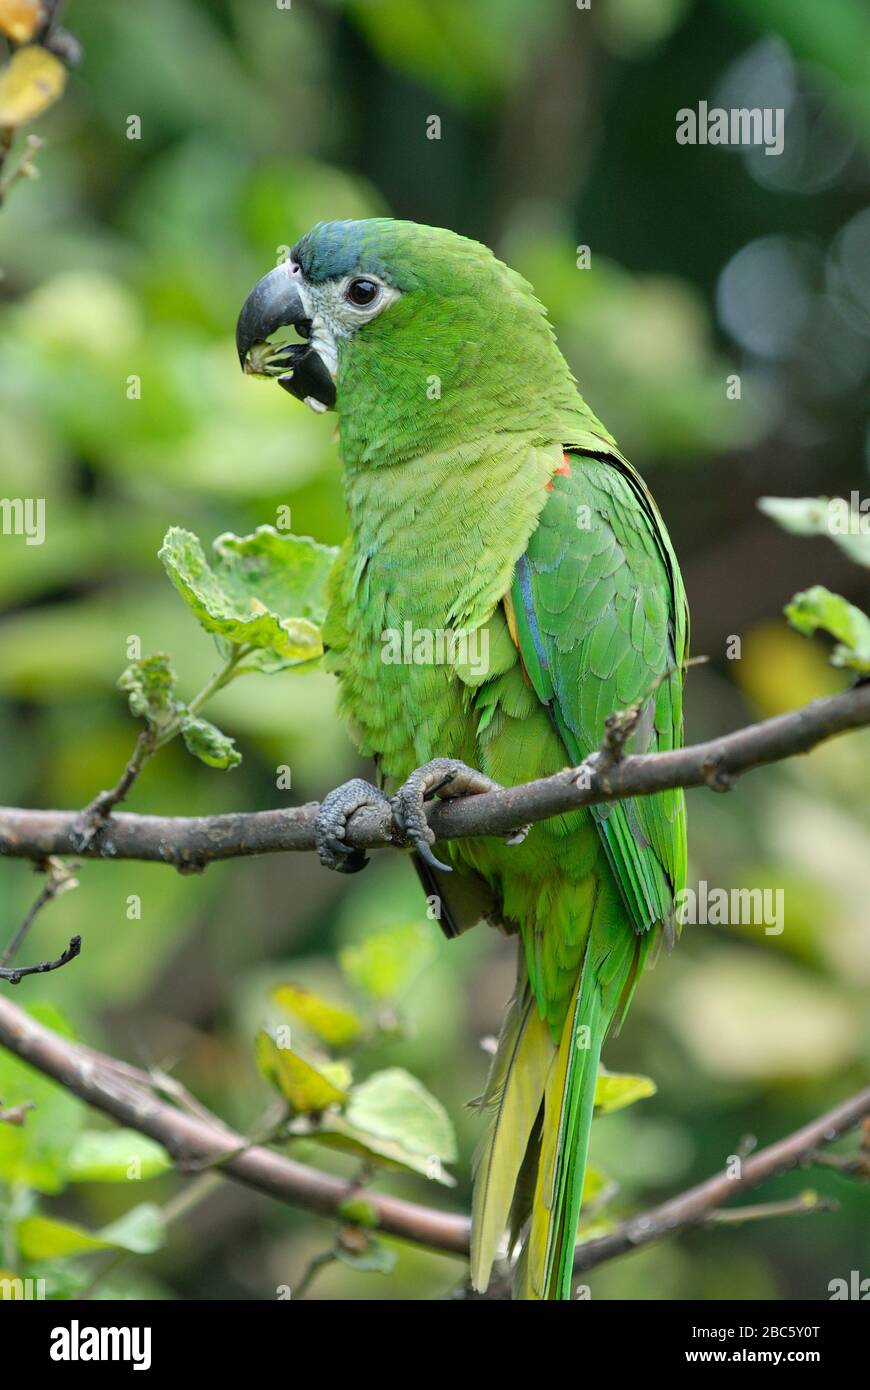 Amazonen High Resolution Stock Photography and Images - Alamy